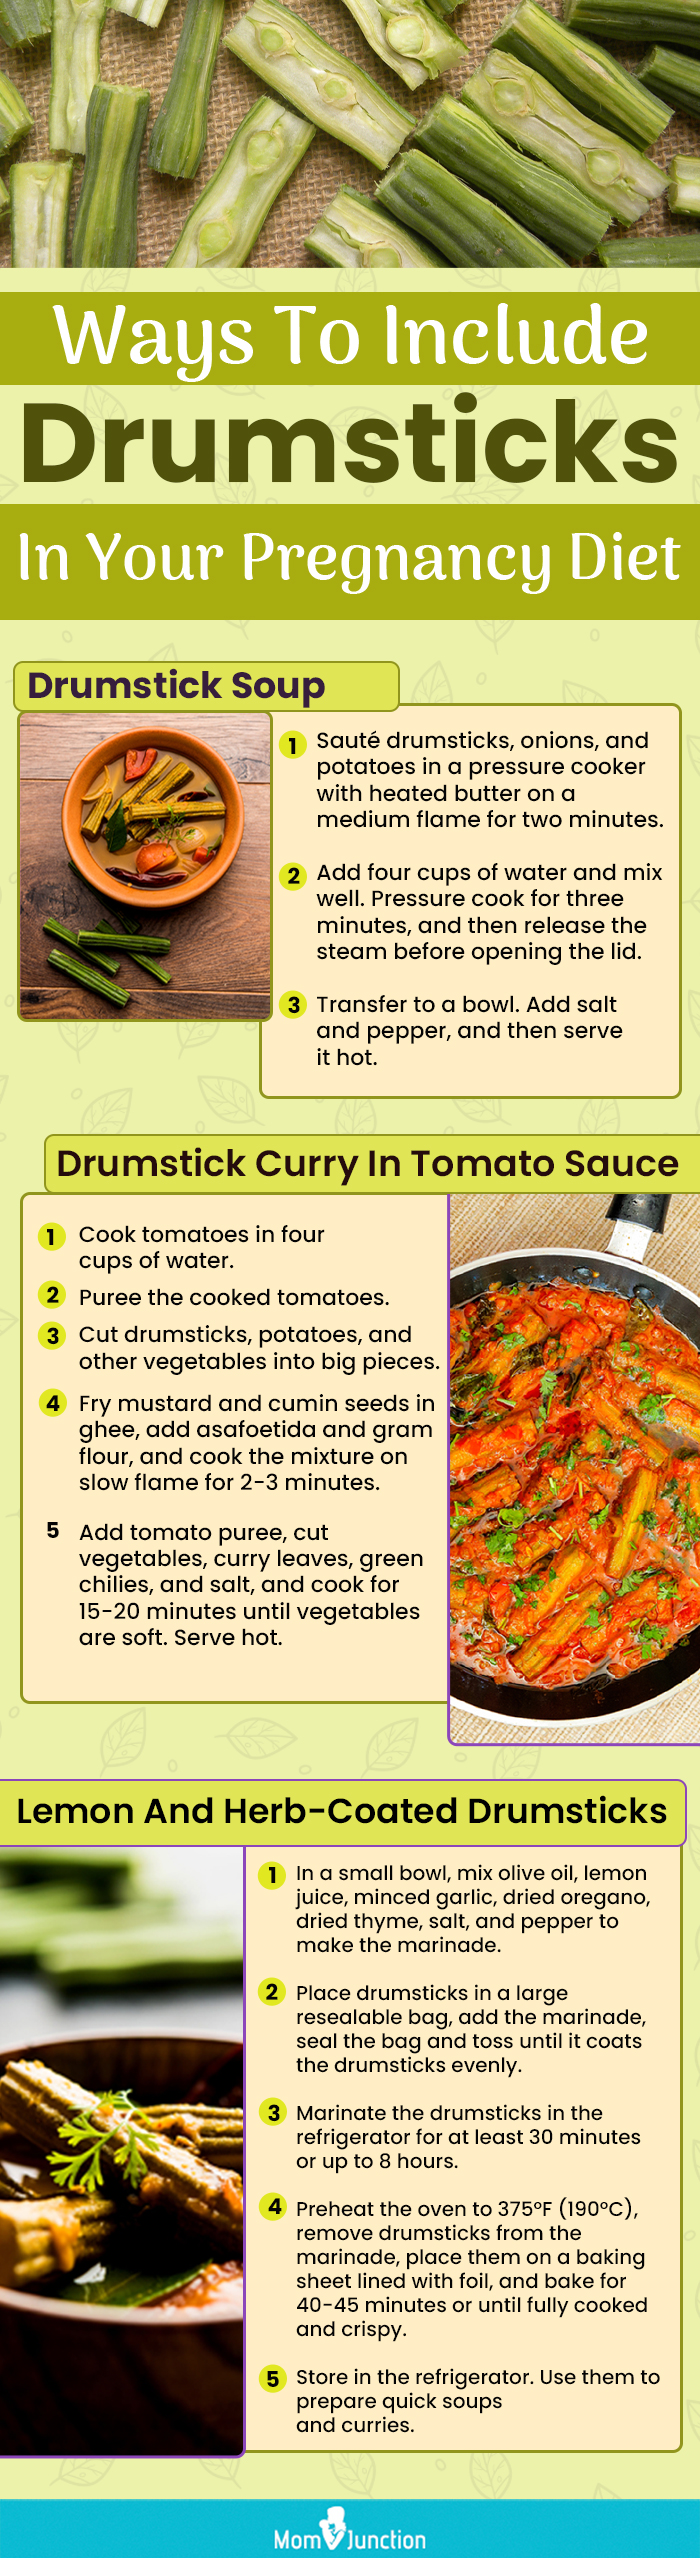 ways to include drumsticks in your pregnancy diet (infographic)